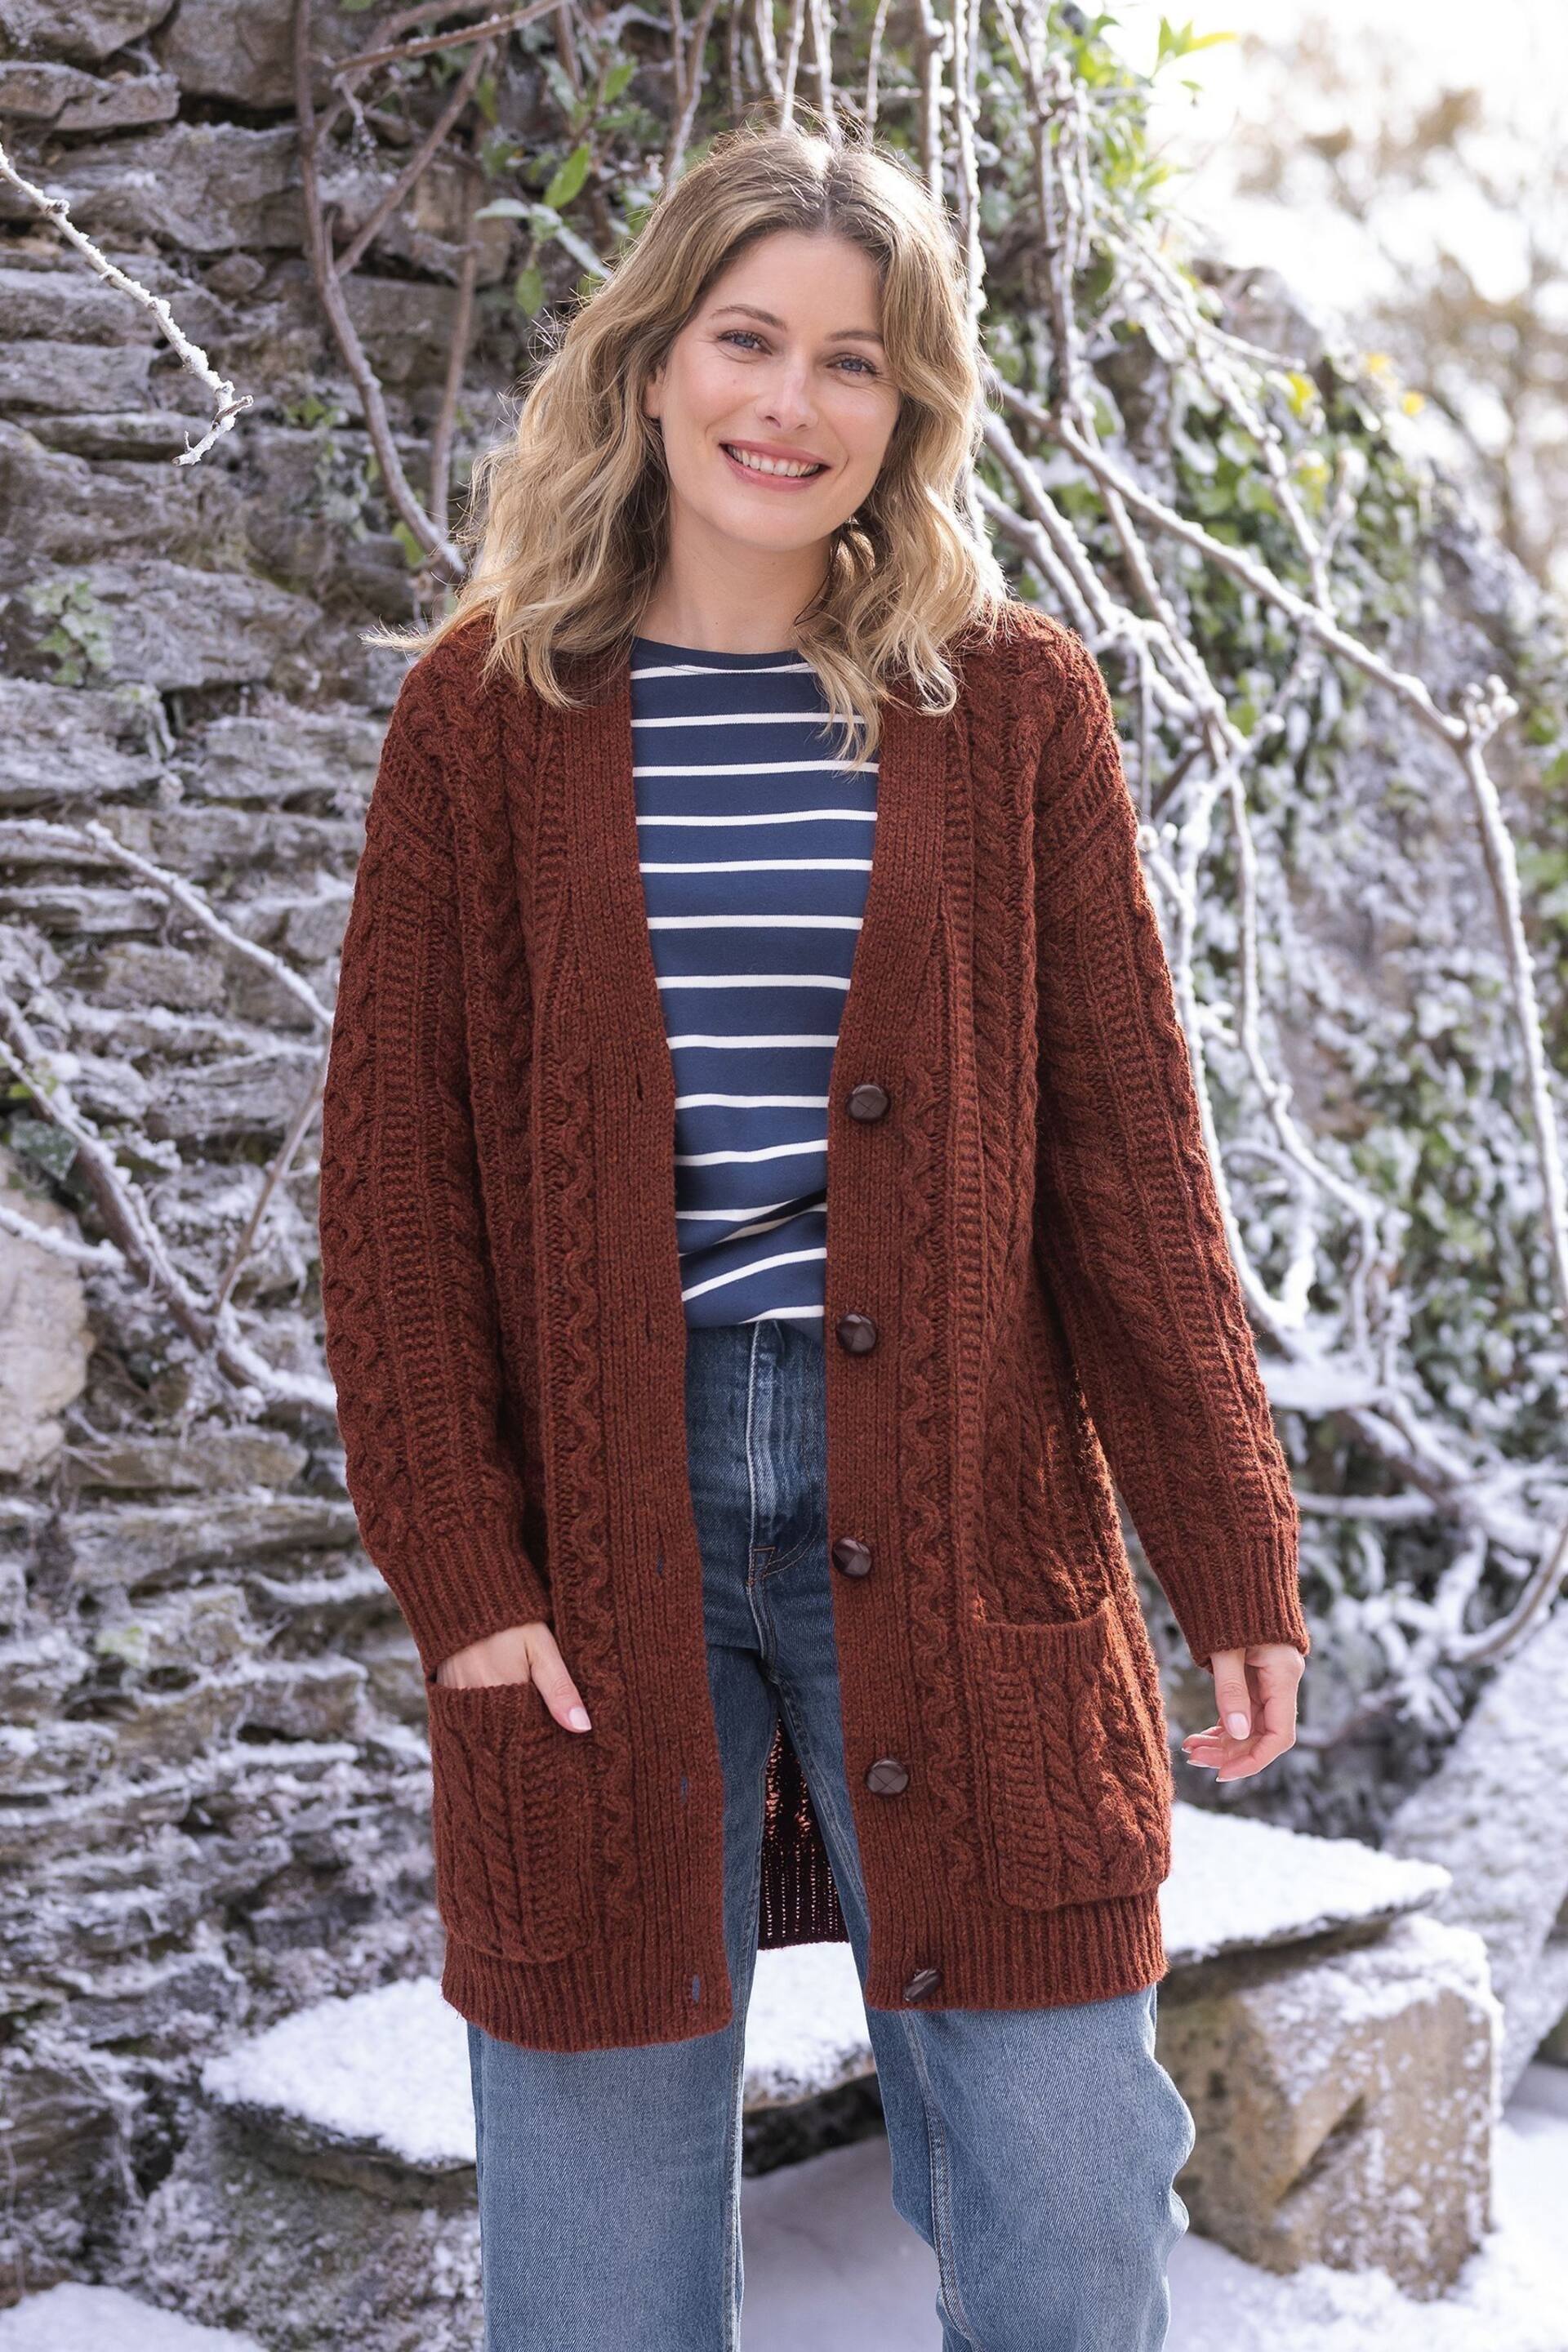 Celtic & Co. Cable Boyfriend Brown Cardigan - Image 1 of 7